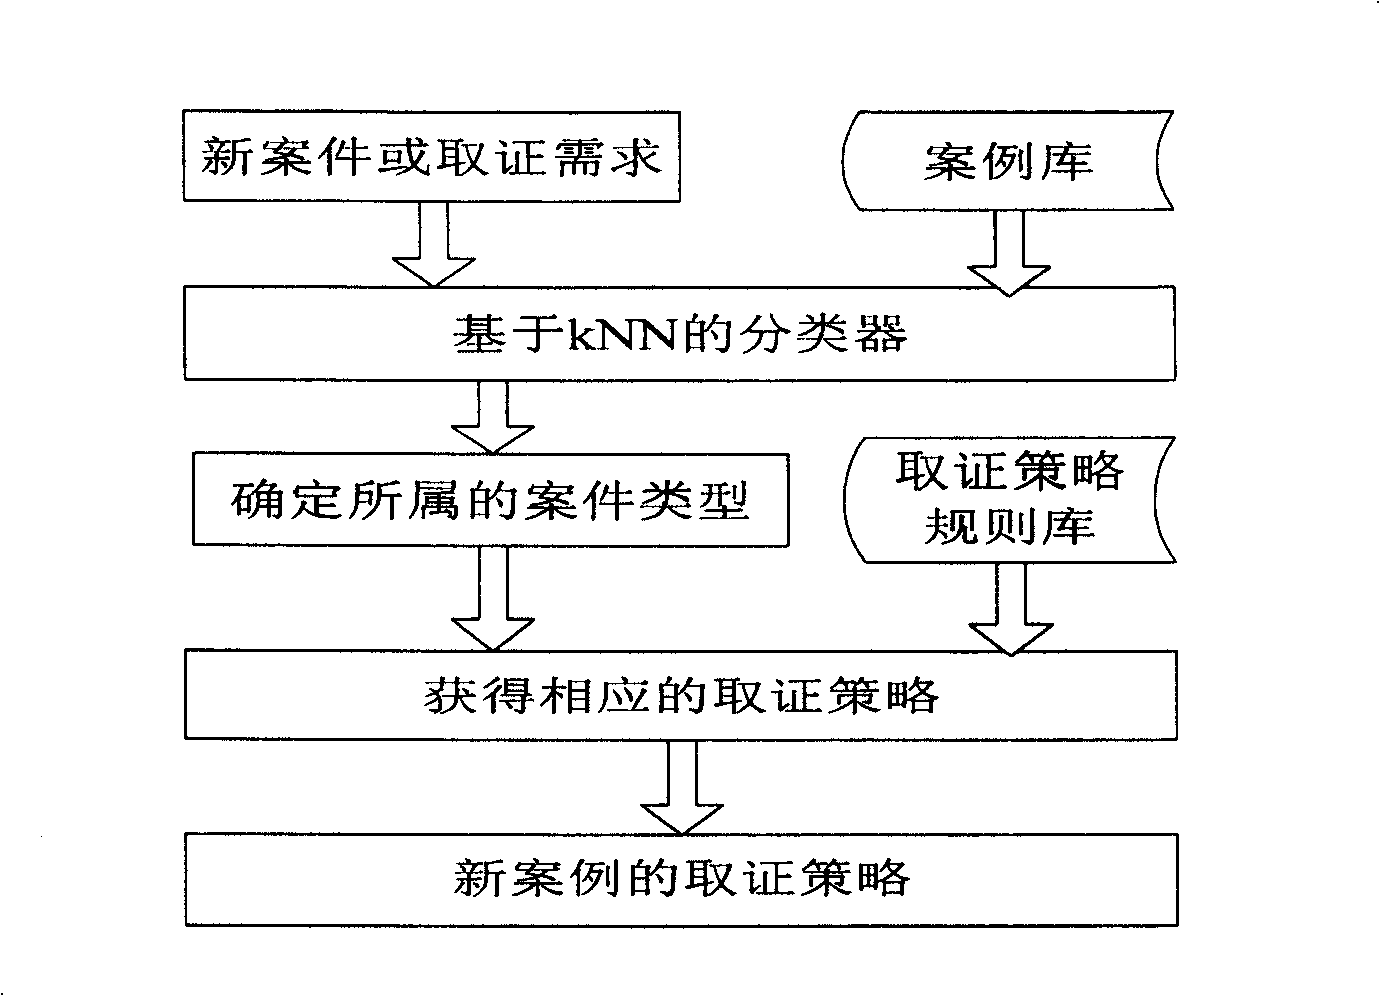 Electronic data evidence obtaining method and system for computer